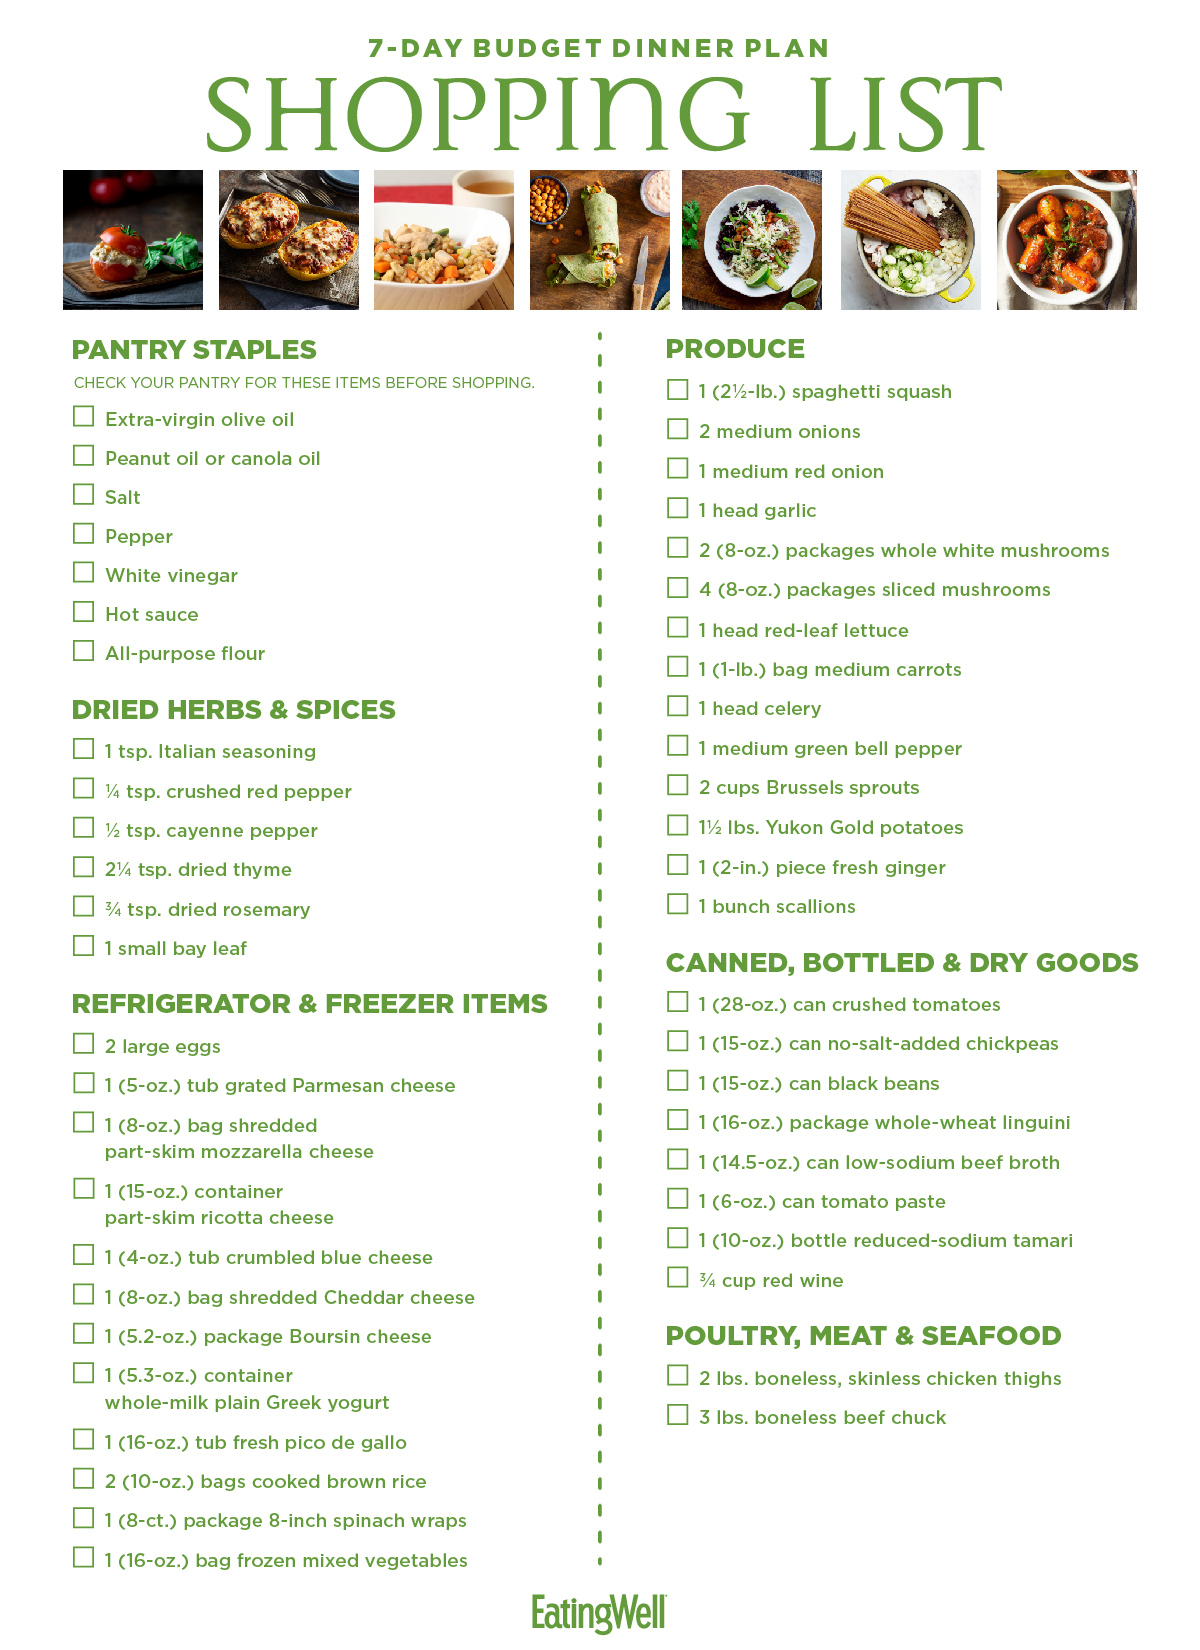 7 Day Budget Meal Plan Shopping List EatingWell